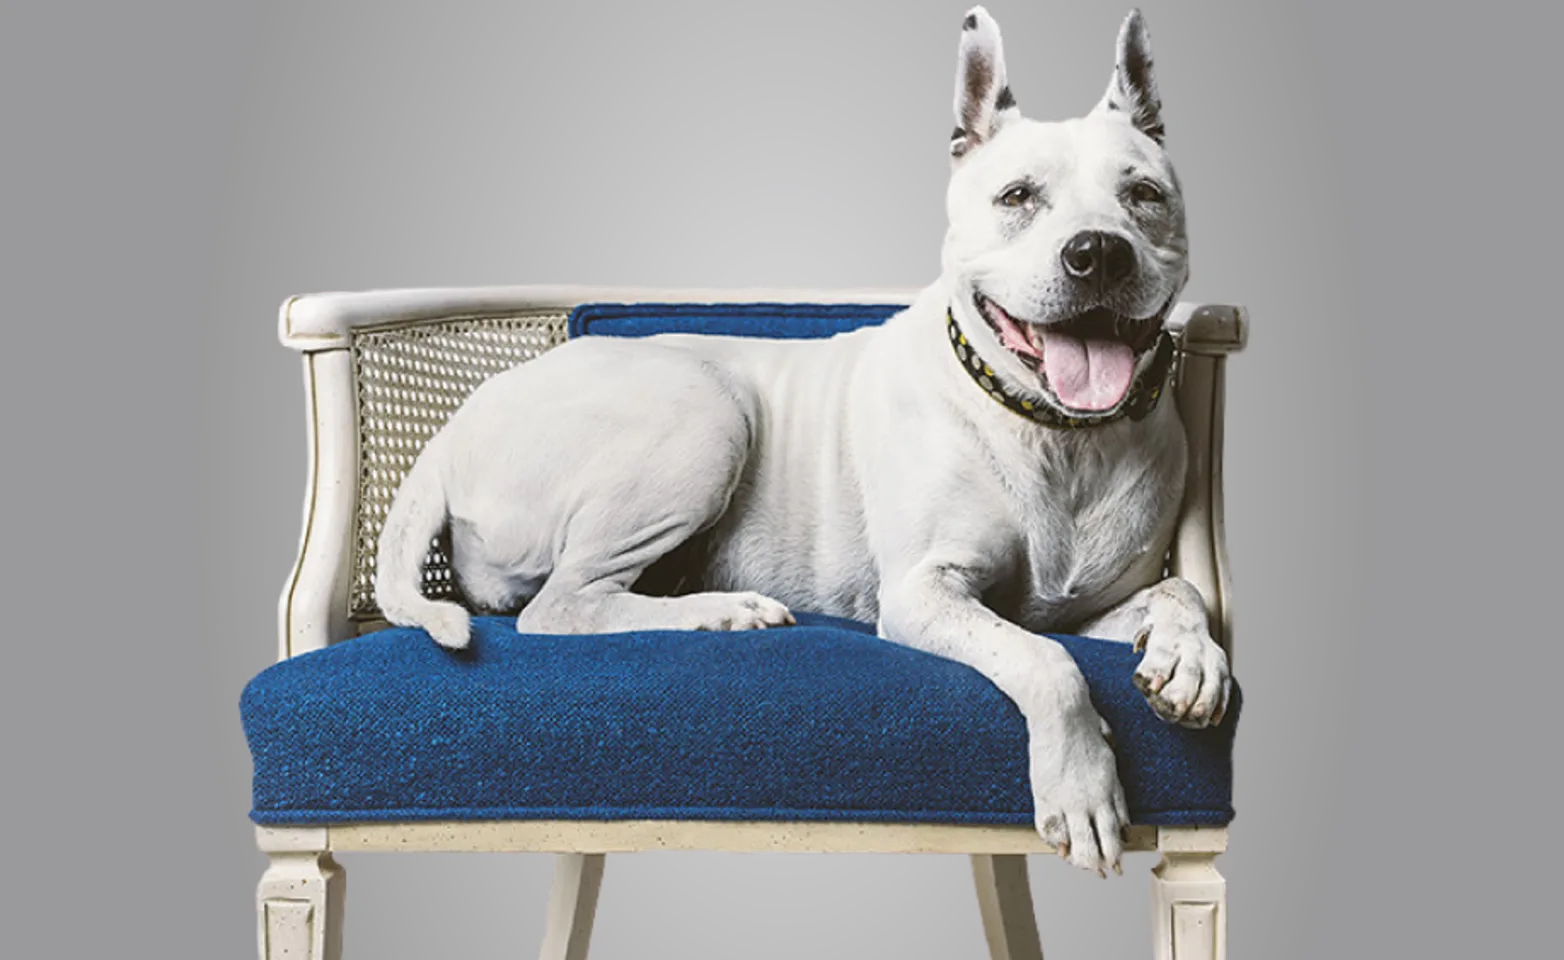 A dog sitting on a blue couch